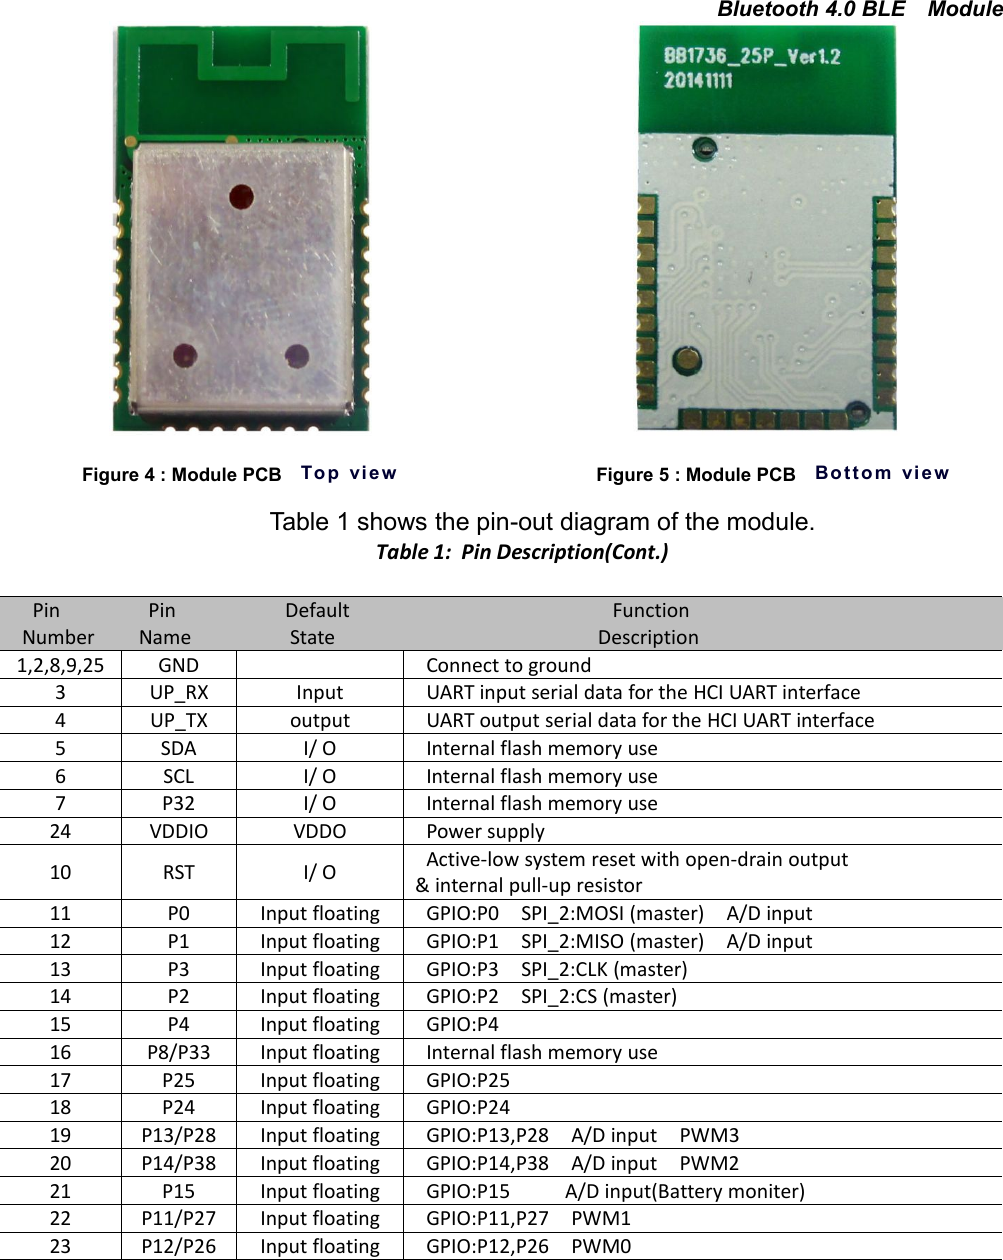 Bluetooth 4.0 BLE ModuleFigure 4 : Module PCB To p v i e w Figure 5 : Module PCB B o t t o m v i e wTable 1 shows the pin-out diagram of the module.Table 1: Pin Description(Cont.)Pin Pin Default FunctionNumber Name State Description1,2,8,9,25 GND Connect to ground3 UP_RX Input UART input serial data for the HCI UART interface4 UP_TX output UART output serial data for the HCI UART interface5 SDA I/ O Internal flash memory use6 SCL I/ O Internal flash memory use7 P32 I/ O Internal flash memory use24 VDDIO VDDO Power supply10 RST I/ O Active-low system reset with open-drain output&amp; internal pull-up resistor11 P0 Input floating GPIO:P0 SPI_2:MOSI (master) A/D input12 P1 Input floating GPIO:P1 SPI_2:MISO (master) A/D input13 P3 Input floating GPIO:P3 SPI_2:CLK (master)14 P2 Input floating GPIO:P2 SPI_2:CS (master)15 P4 Input floating GPIO:P416 P8/P33 Input floating Internal flash memory use17 P25 Input floating GPIO:P2518 P24 Input floating GPIO:P2419 P13/P28 Input floating GPIO:P13,P28 A/D input PWM320 P14/P38 Input floating GPIO:P14,P38 A/D input PWM221 P15 Input floating GPIO:P15 A/D input(Battery moniter)22 P11/P27 Input floating GPIO:P11,P27 PWM123 P12/P26 Input floating GPIO:P12,P26 PWM0